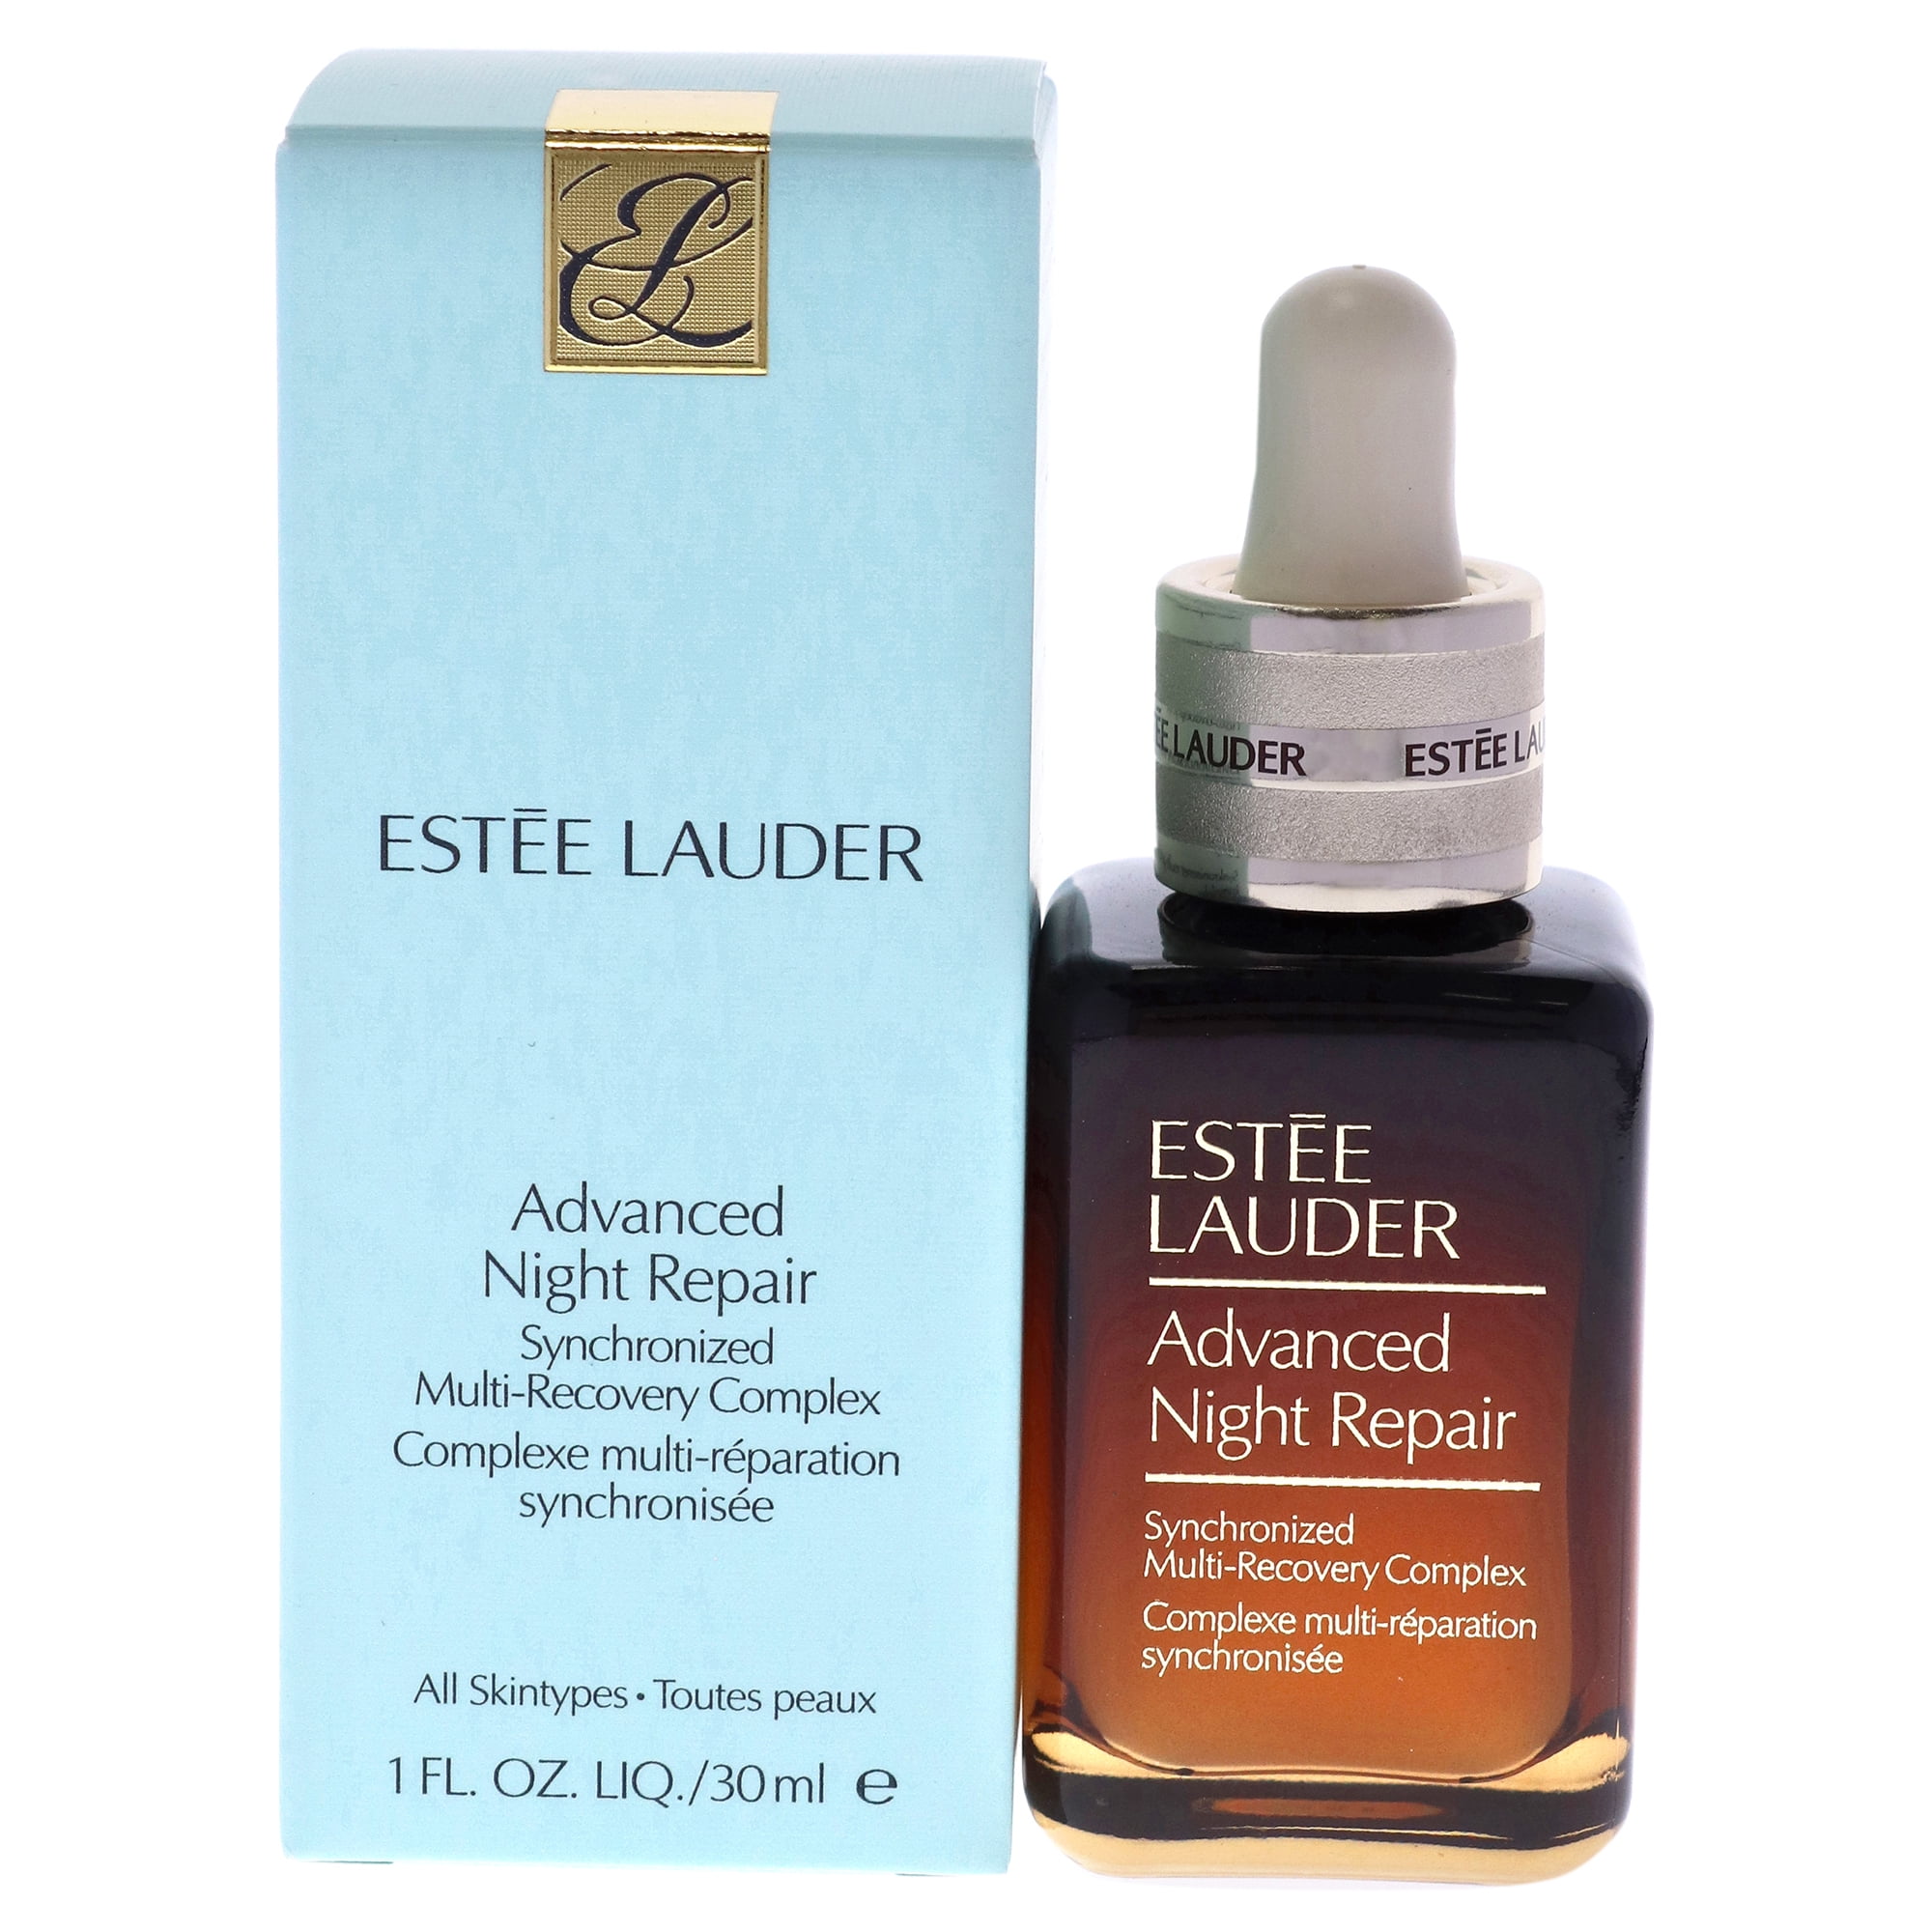 Estee Lauder advanced night repair synchronized recovery complex ii for all  skin type, 1.7 Ounce/50Ml, Brand New - Walmart.com